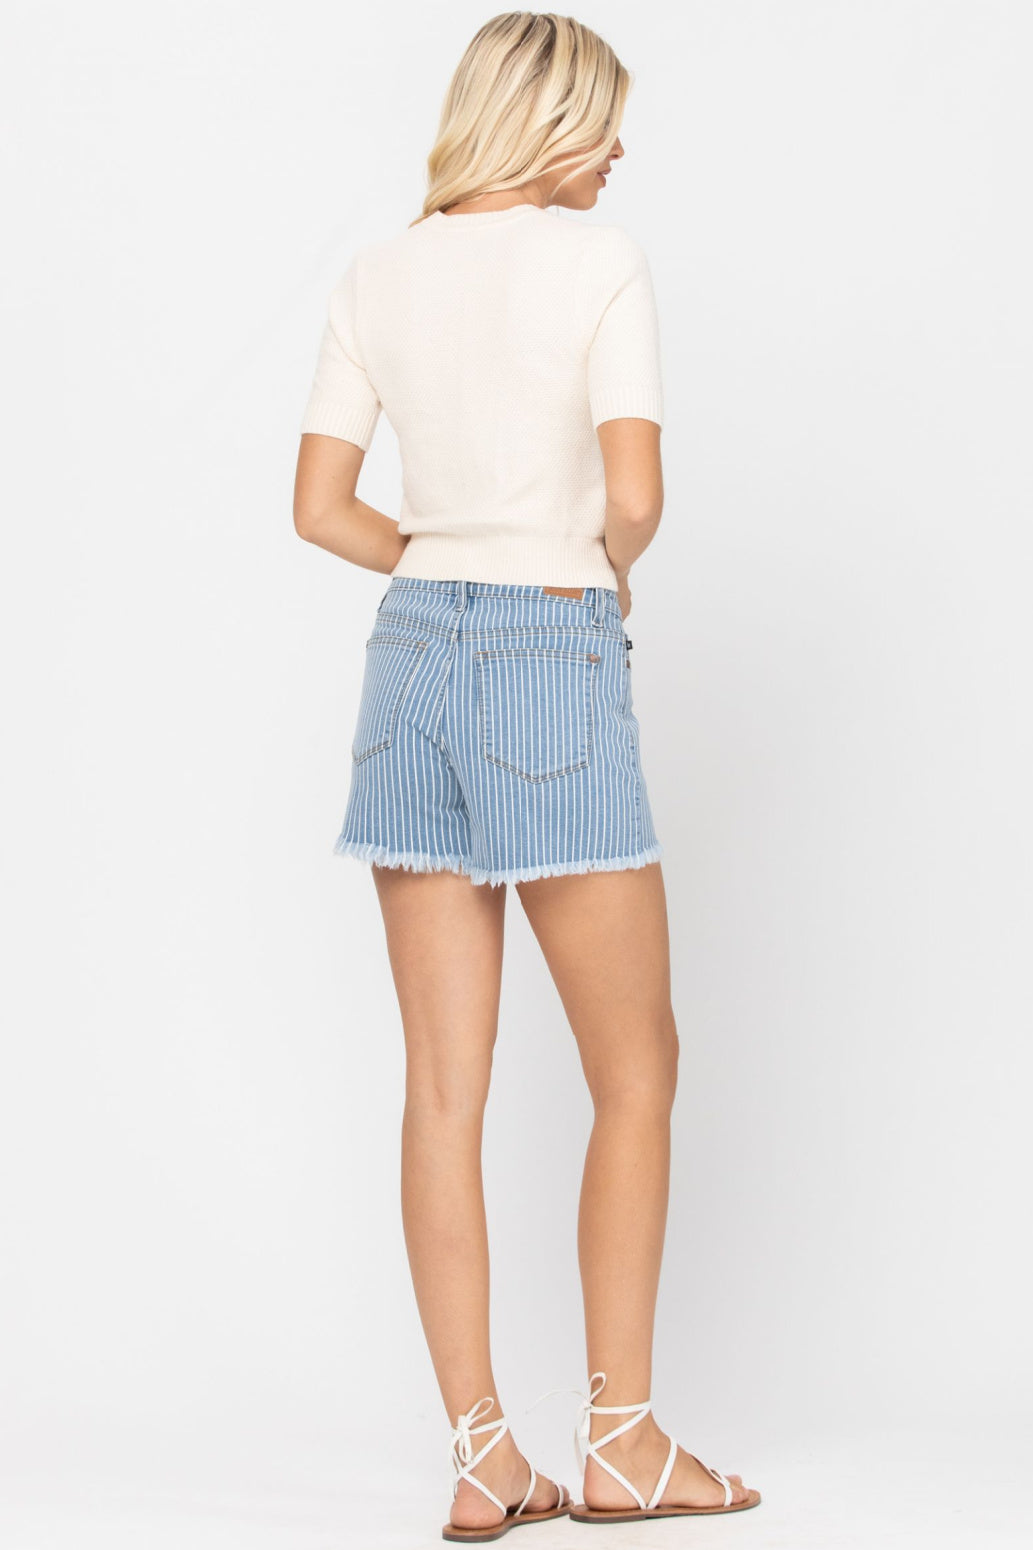 Judy Blue Blue And White Stripe Cut Off High Waist Shorts Style 150027